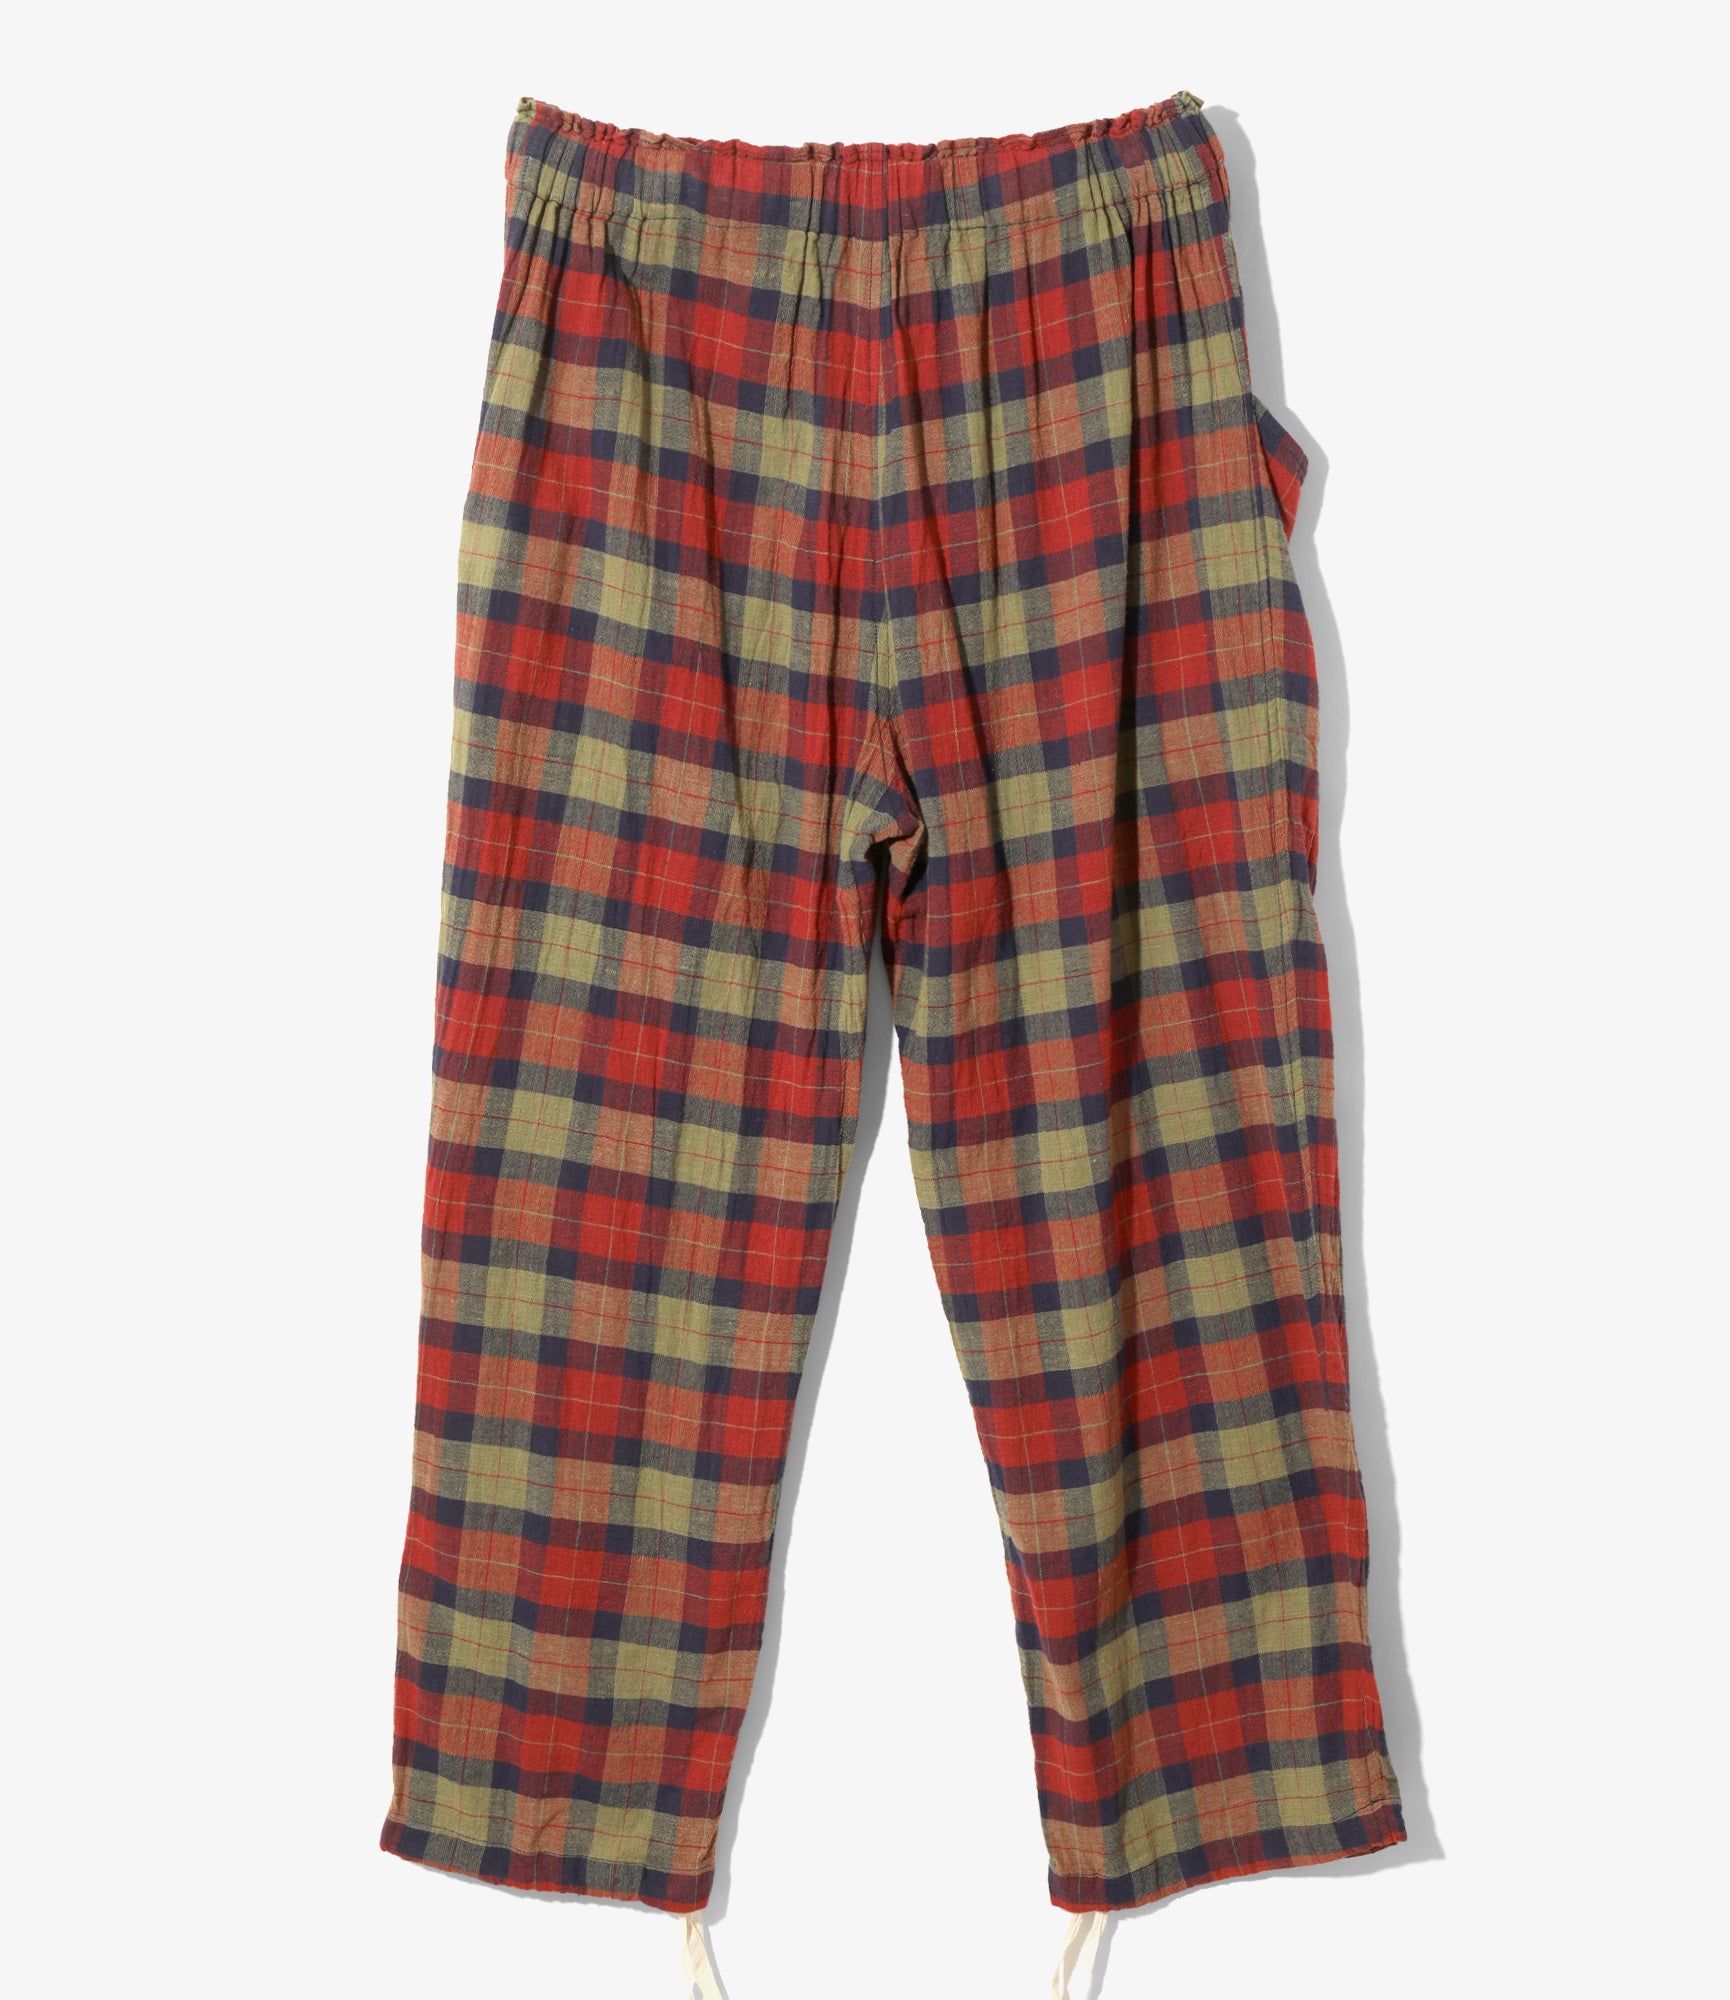 South2 West8 Army String Pant - Cotton Boiled Cloth / Tartan Plaid - Red